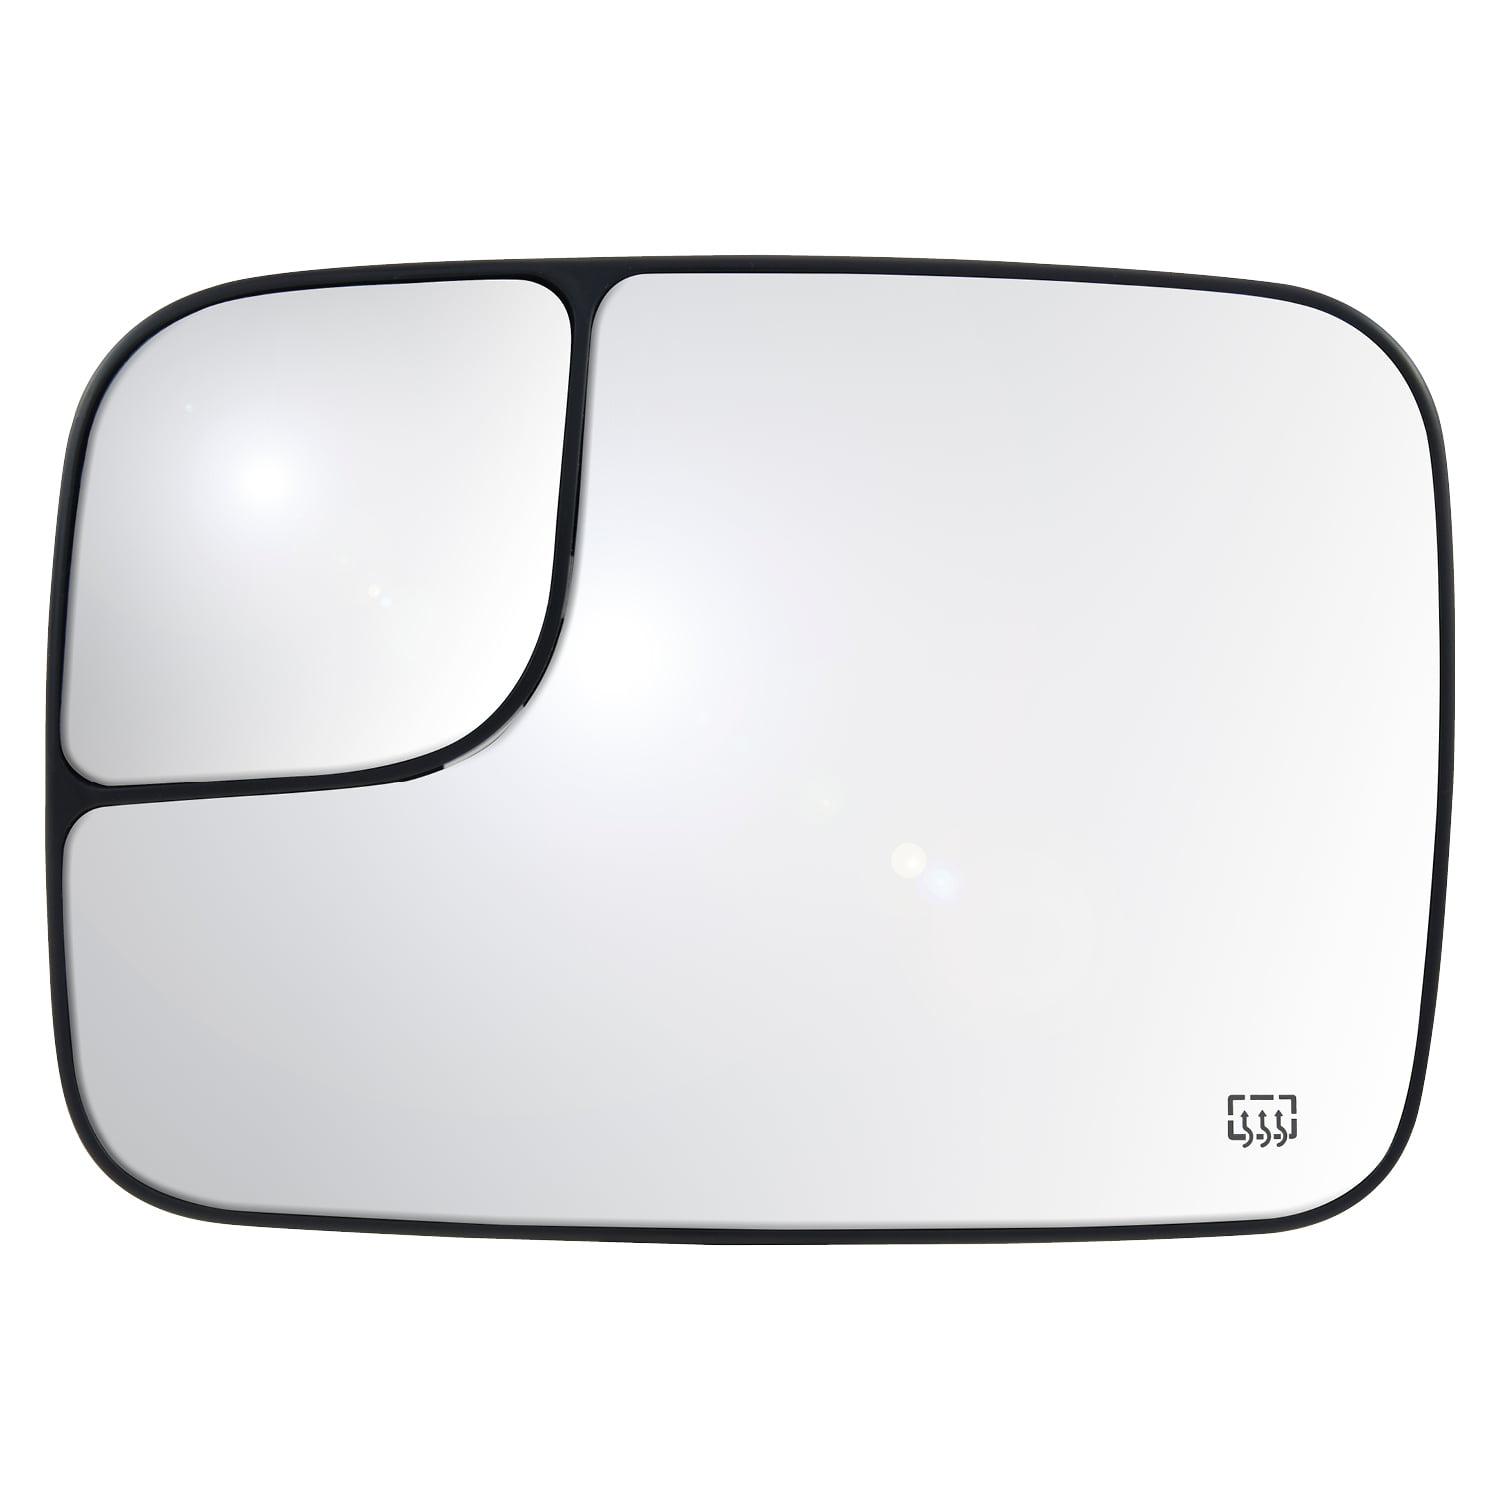 Fit System Passenger Side Heated Mirror Glass w/Backing Plate Ram Pick-Up 3500 Ram Pick-Up 2500 7 3/16 x 10 1/4 x 11 1/16 Dodge Ram Pick-Up 1500 for OE Towing Mirror, w/Blind spot 